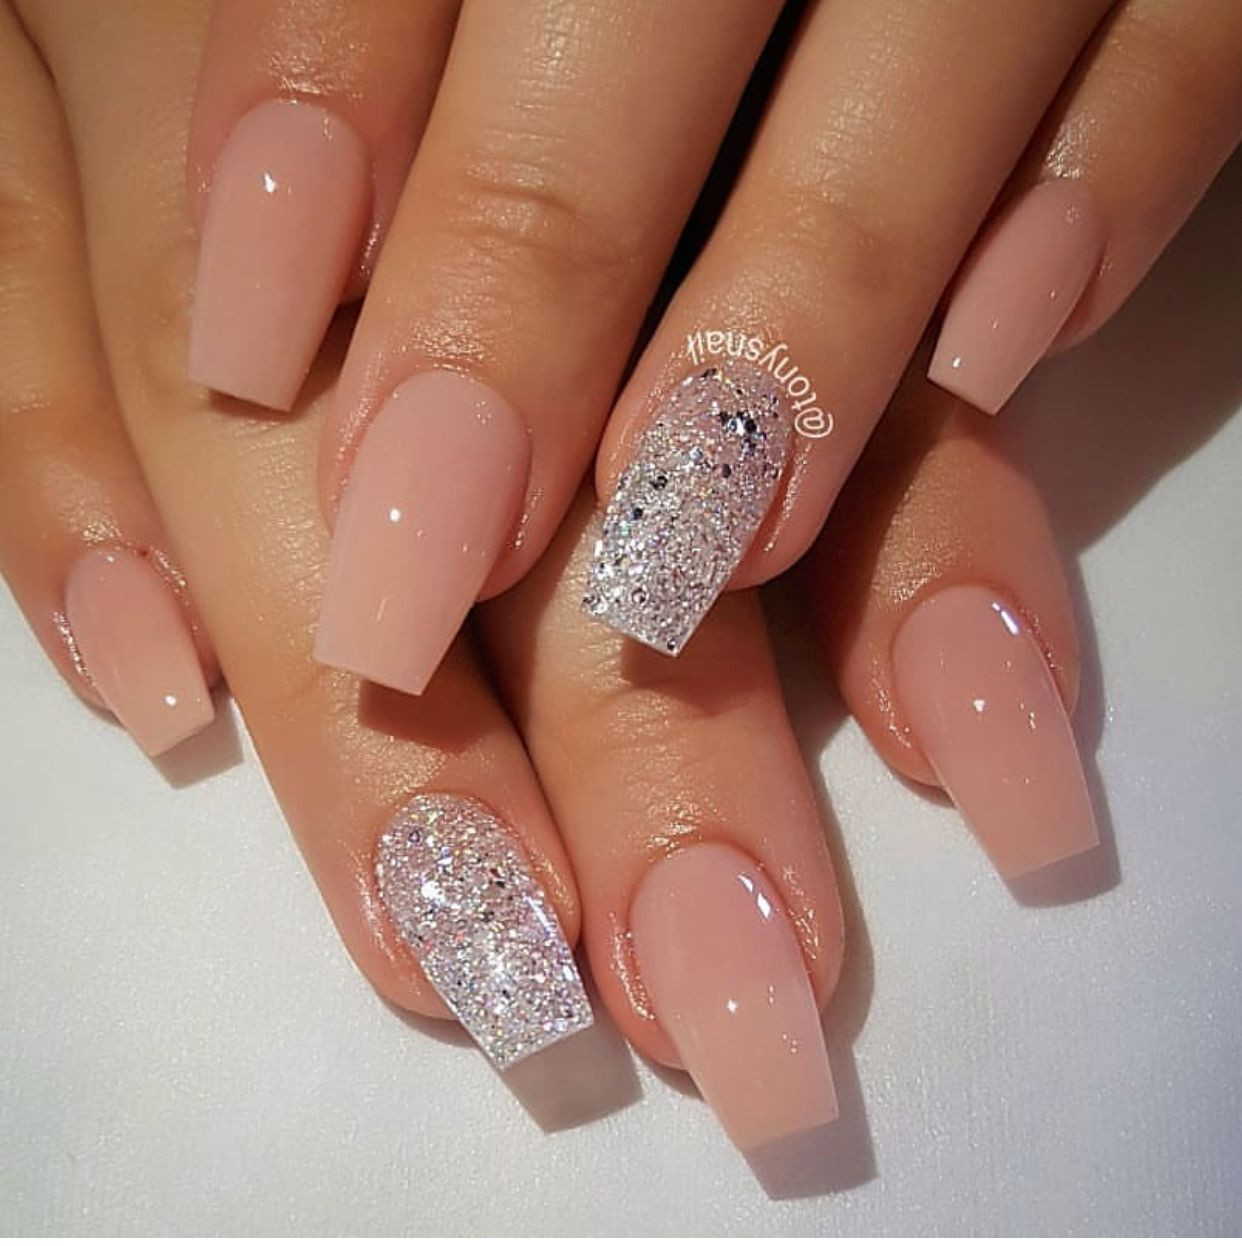 Pink And Glitter Nails
 Nail art pink and silver glitter nails in 2019